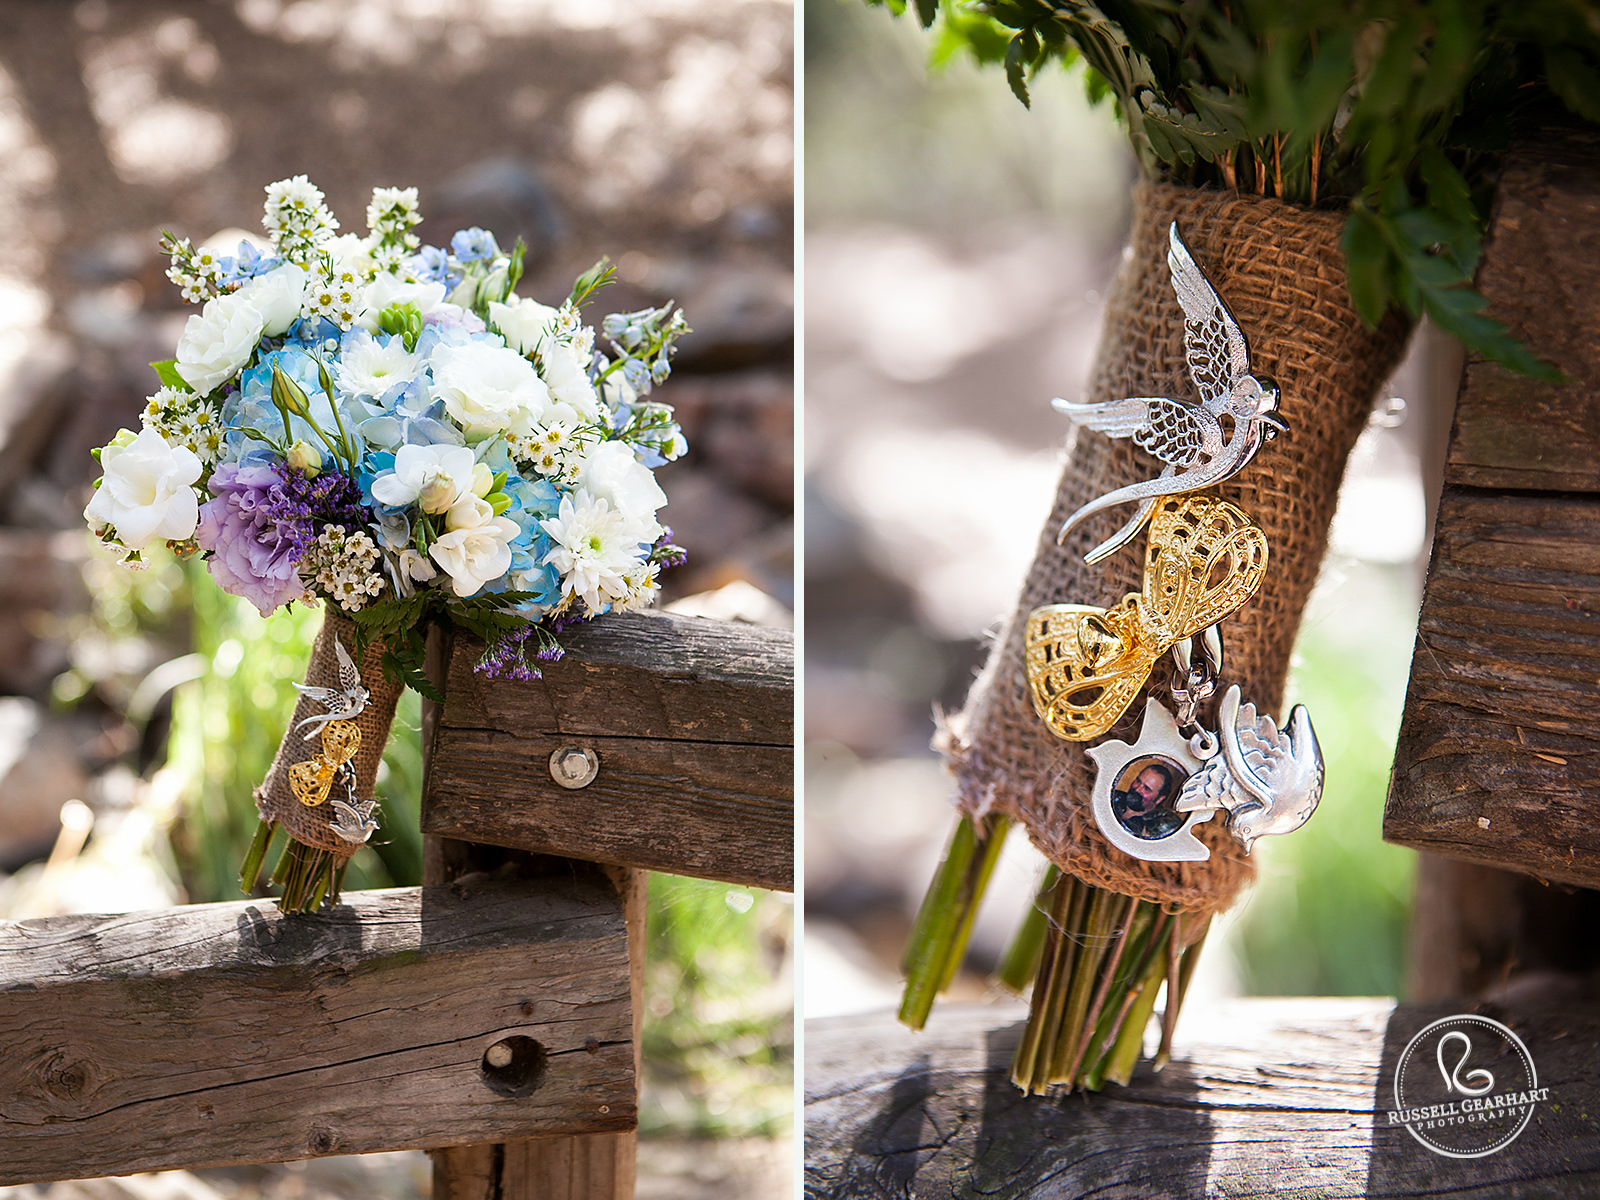 Rustic Wedding Bouquet – Oak Canyon Nature Center Wedding: Orange County, CA – Russell Gearhart Photography – www.gearhartphoto.com  